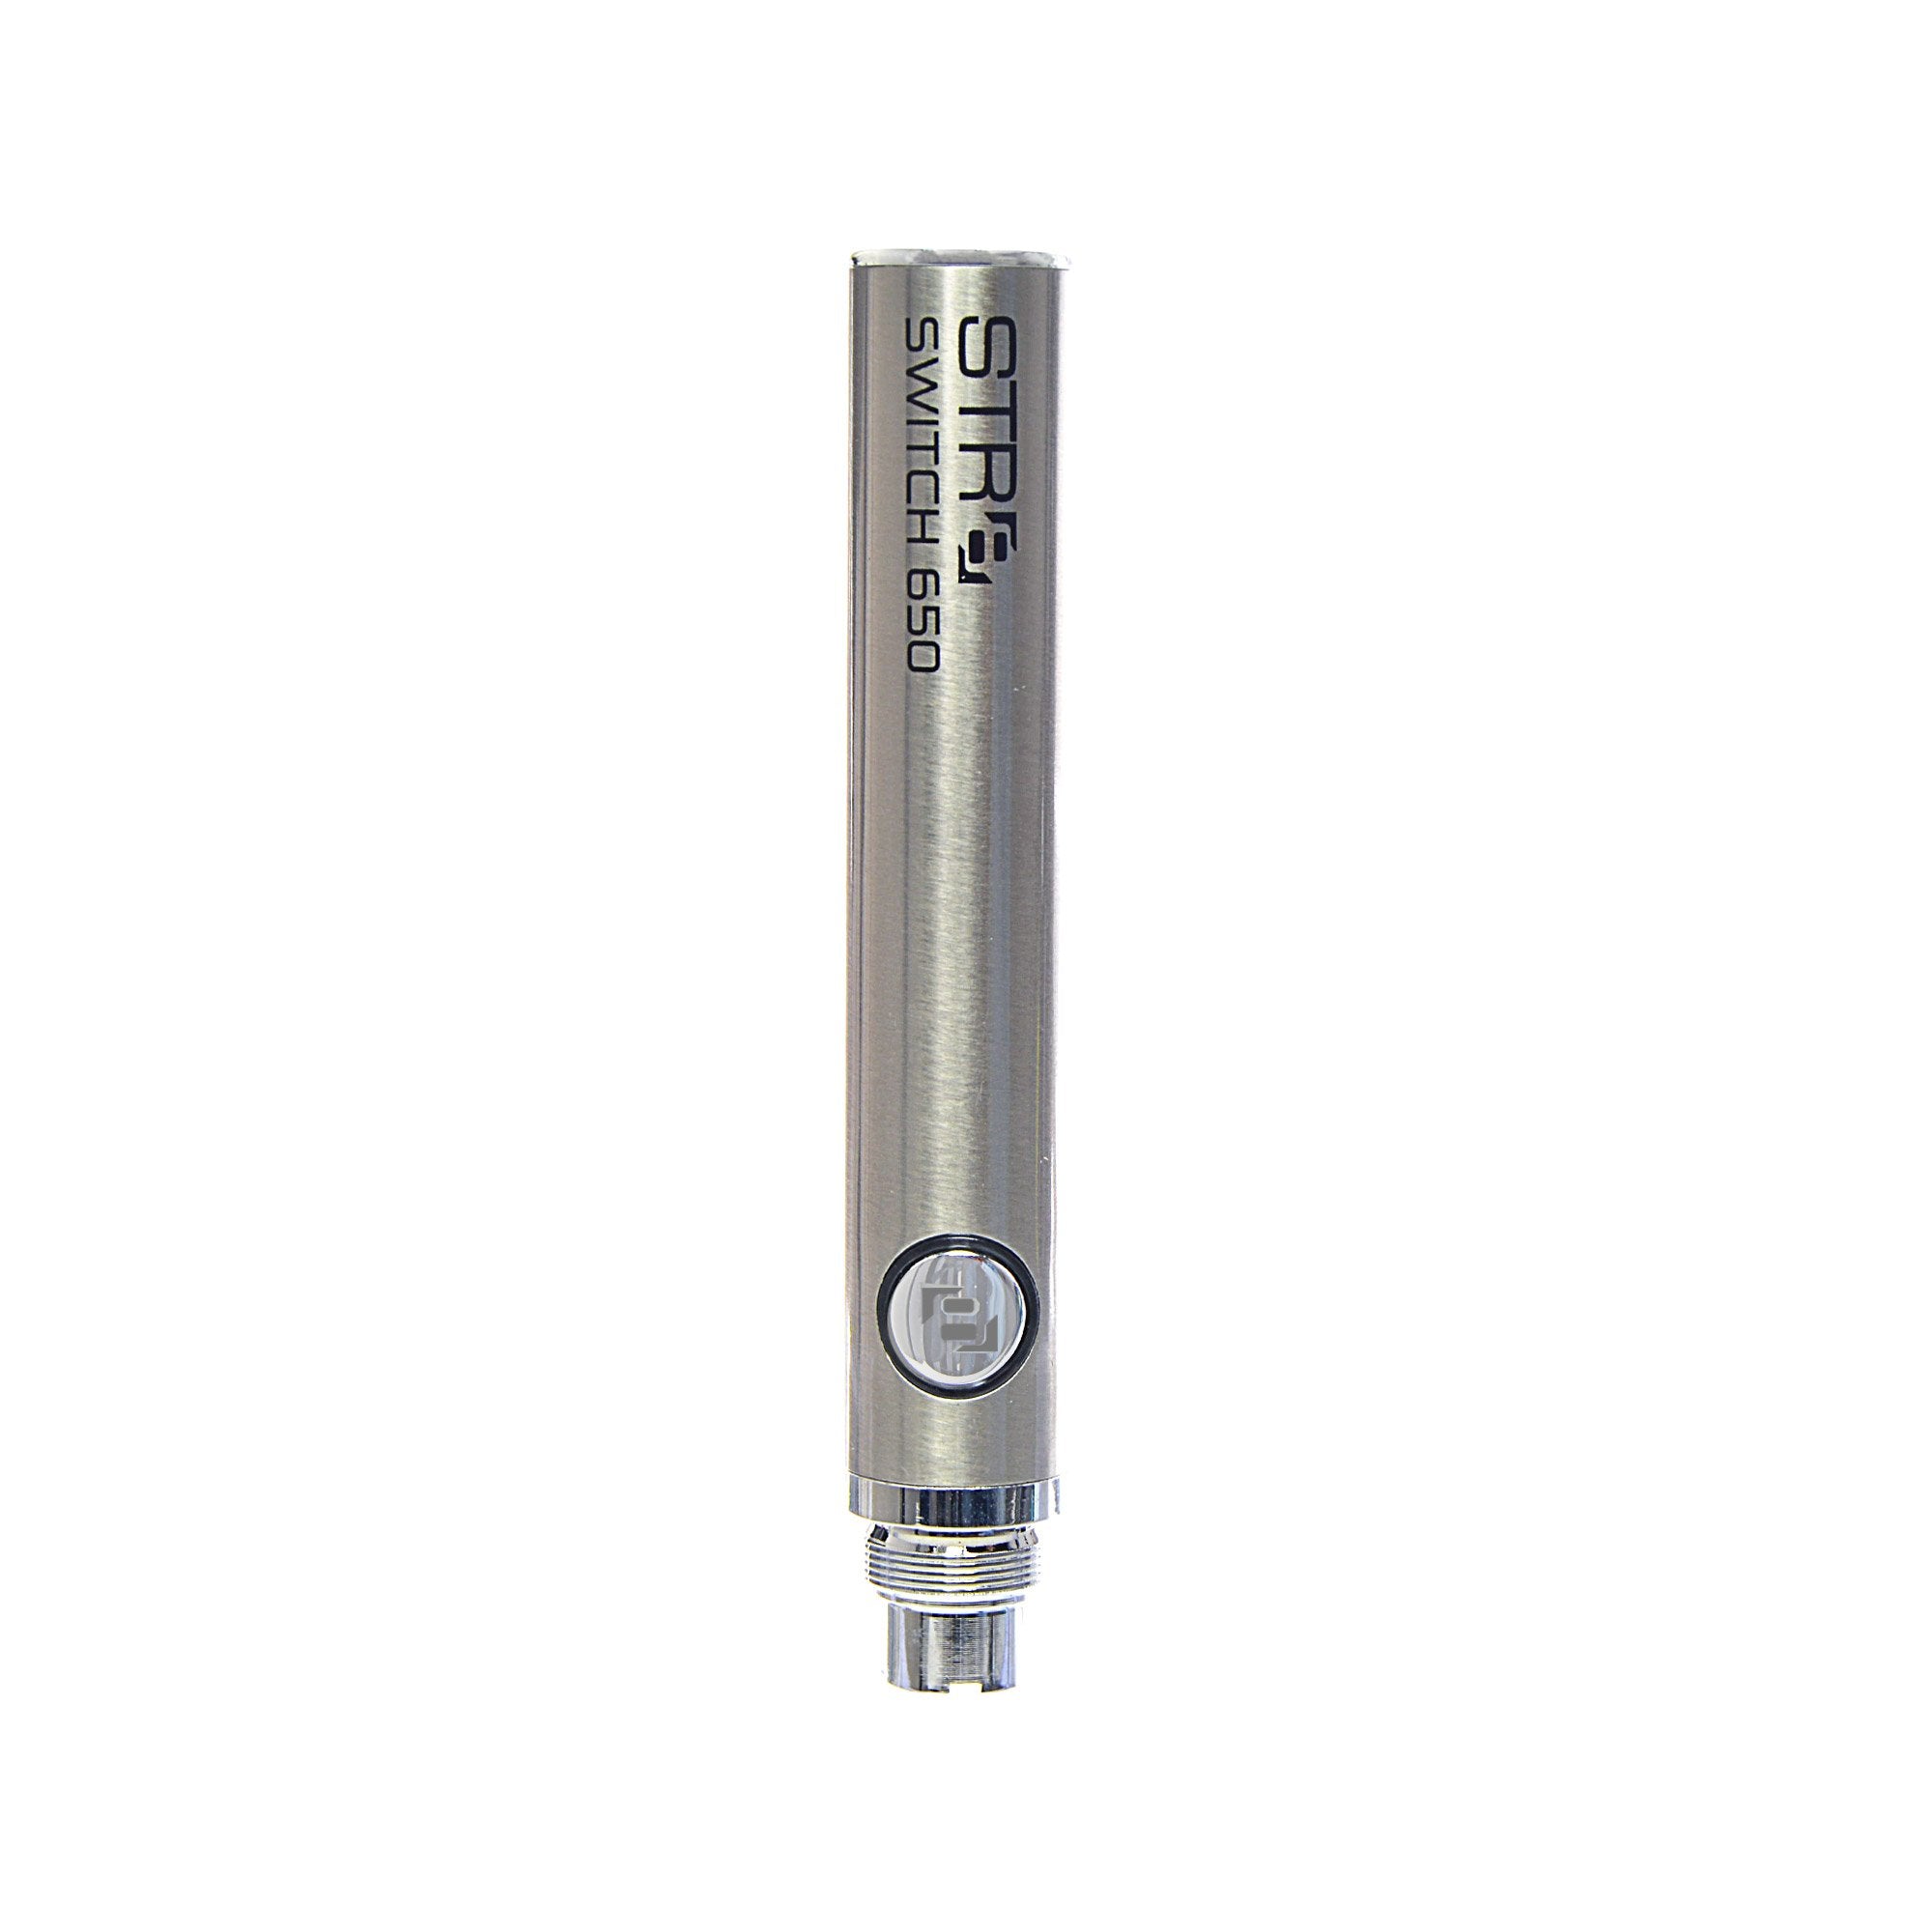 STR8 | 'Retail Display' EVOD Batteries | Switch/Revolve - Mixed - 24 Count - 3